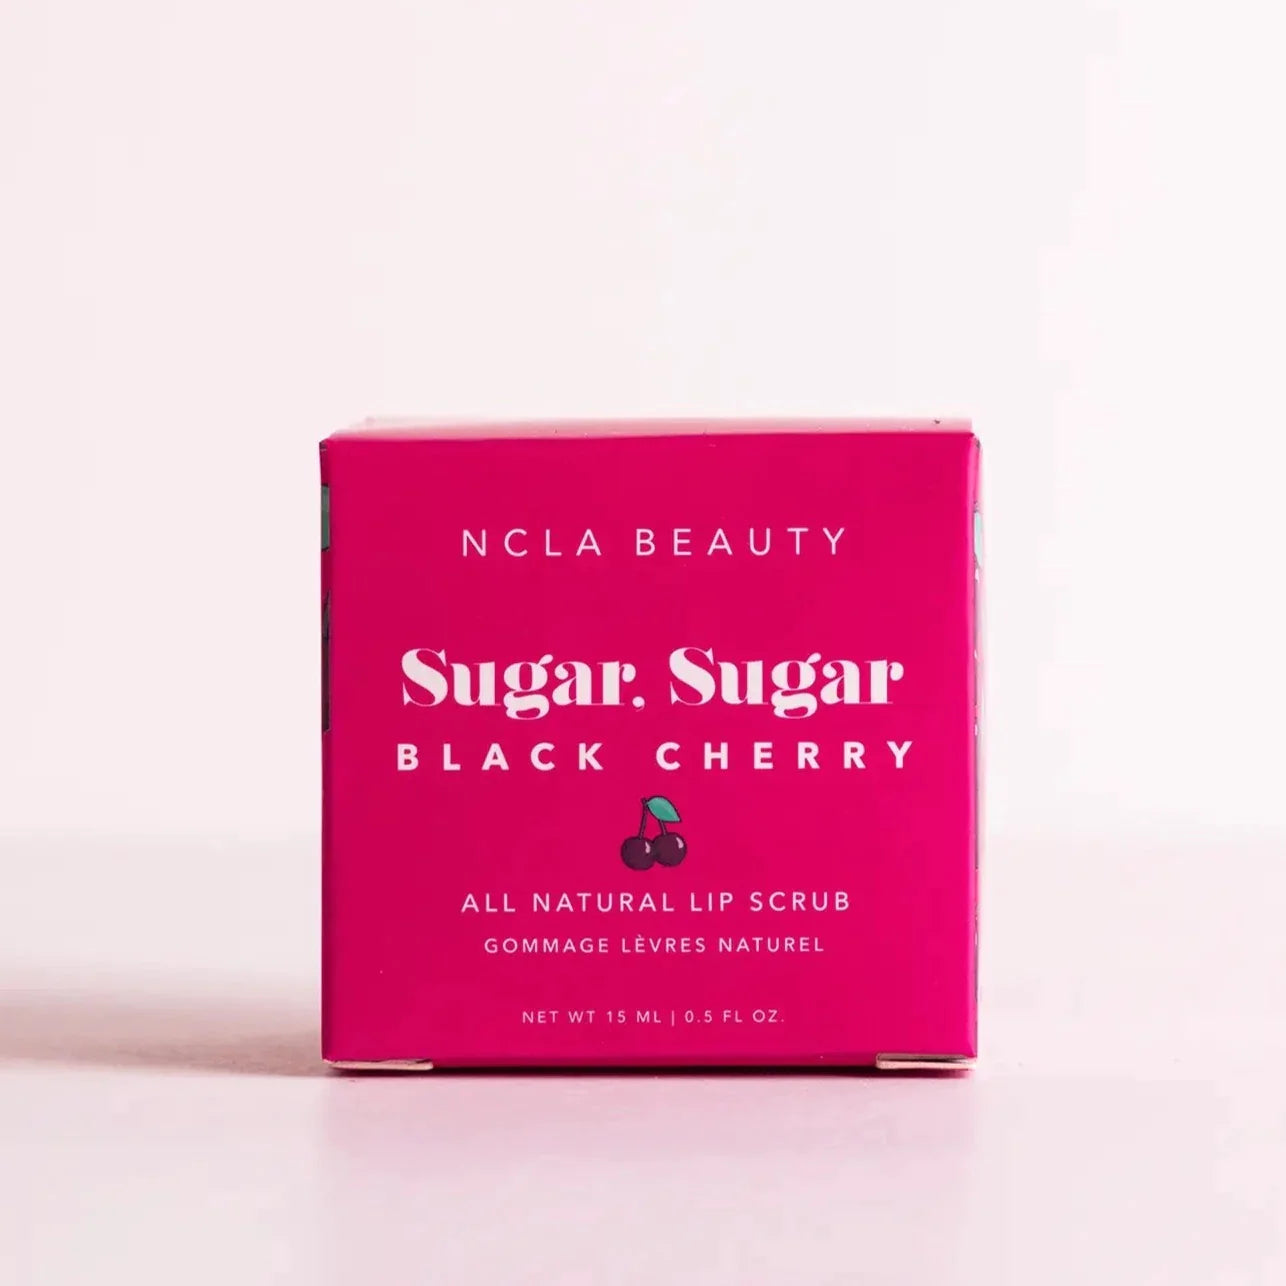 Magenta square box with white text on the front. Text reads &quot;NCLA Beauty Sugar, Sugar Black Cherry All Natural Lip Scrub&quot;. Has a small cherry illustration under the name